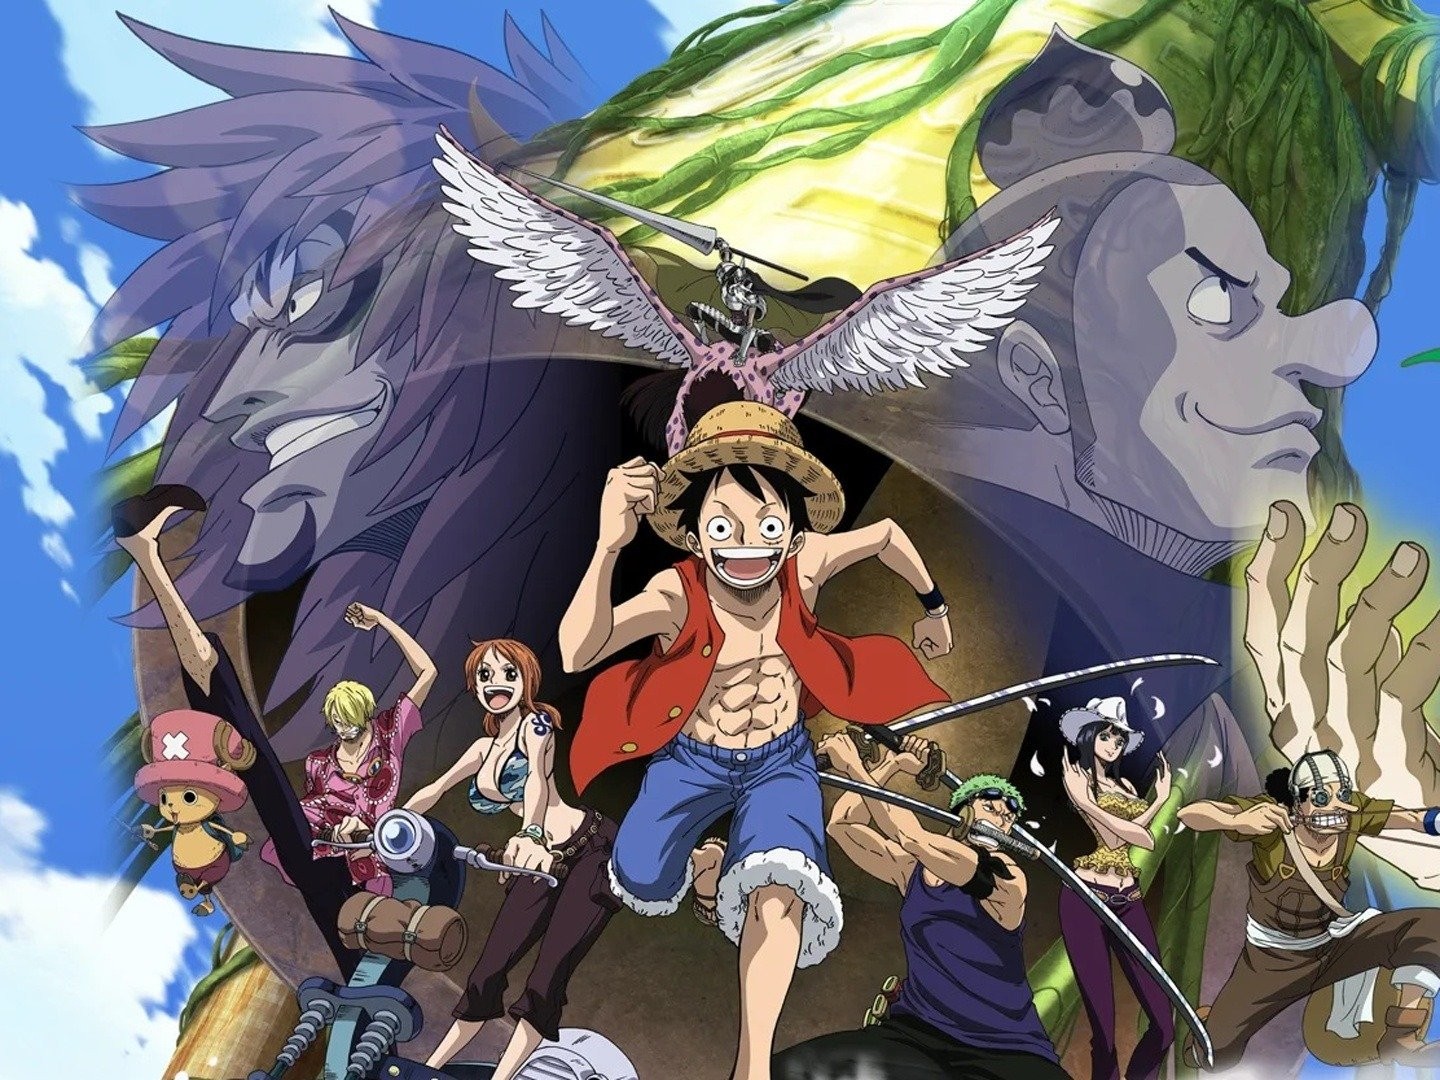 One Piece Special Edition (HD, Subtitled): Sky Island (136-206) Take to the  Sky! Ride the Knockup Stream! - Watch on Crunchyroll